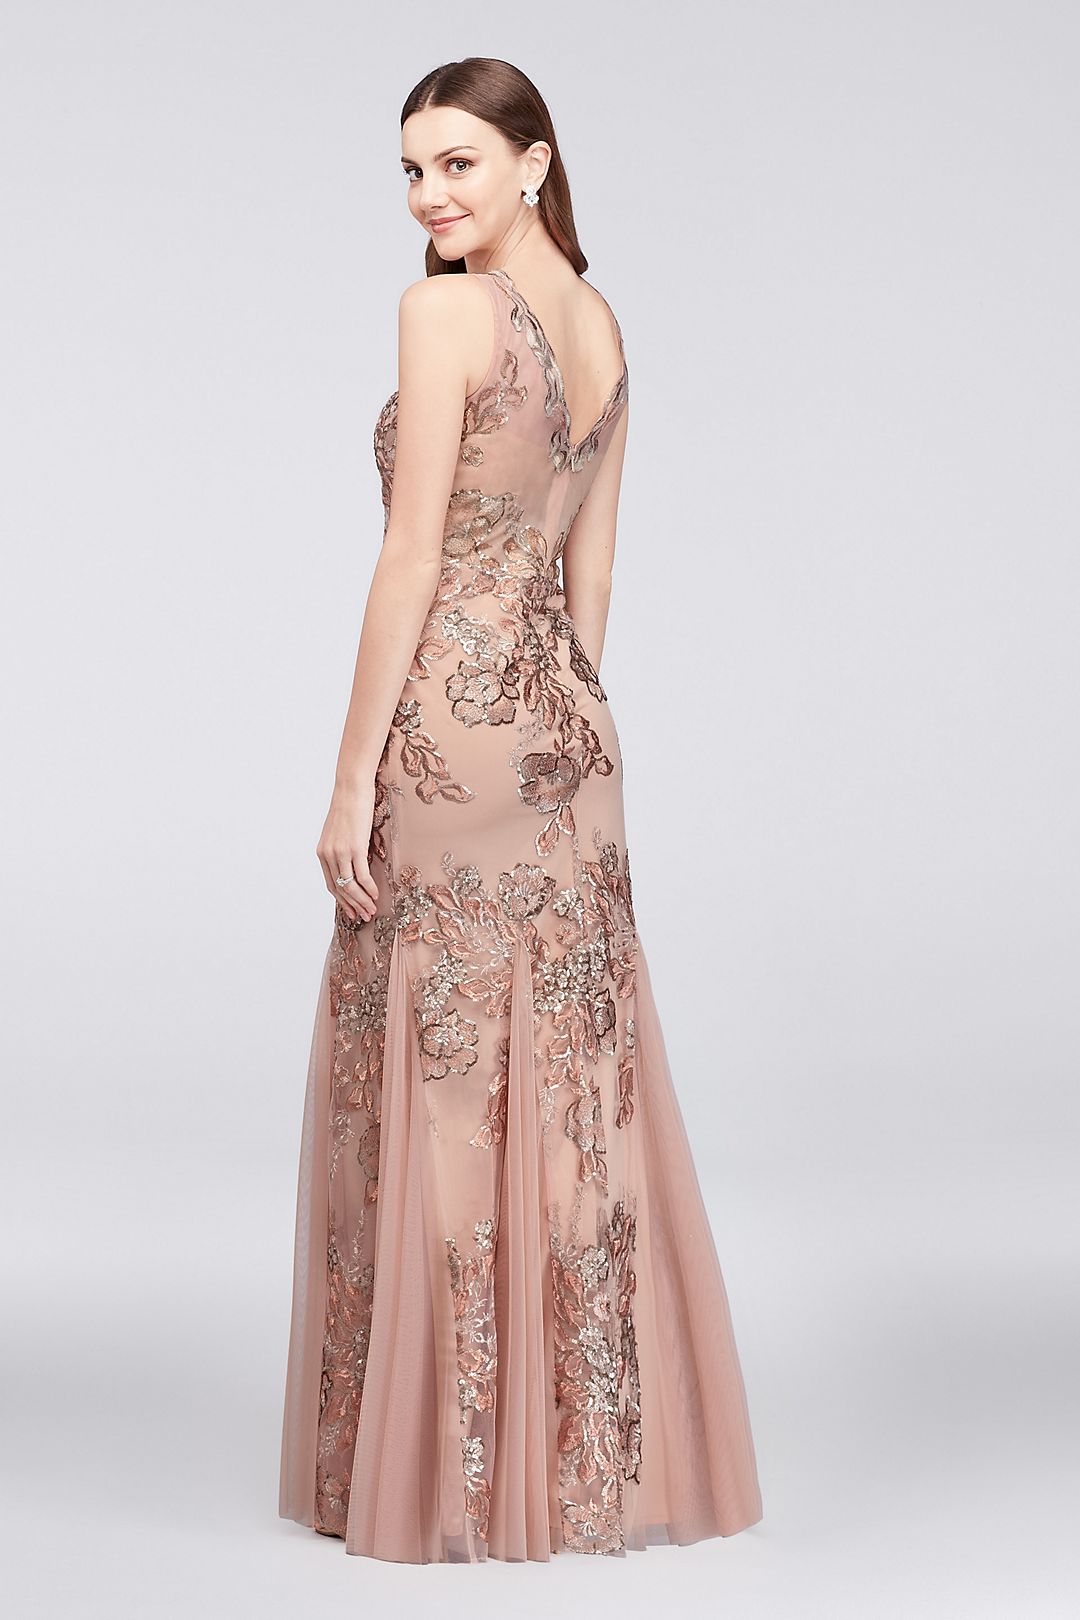 Embroidered Floral Sequin Mesh Mermaid Gown Image 2